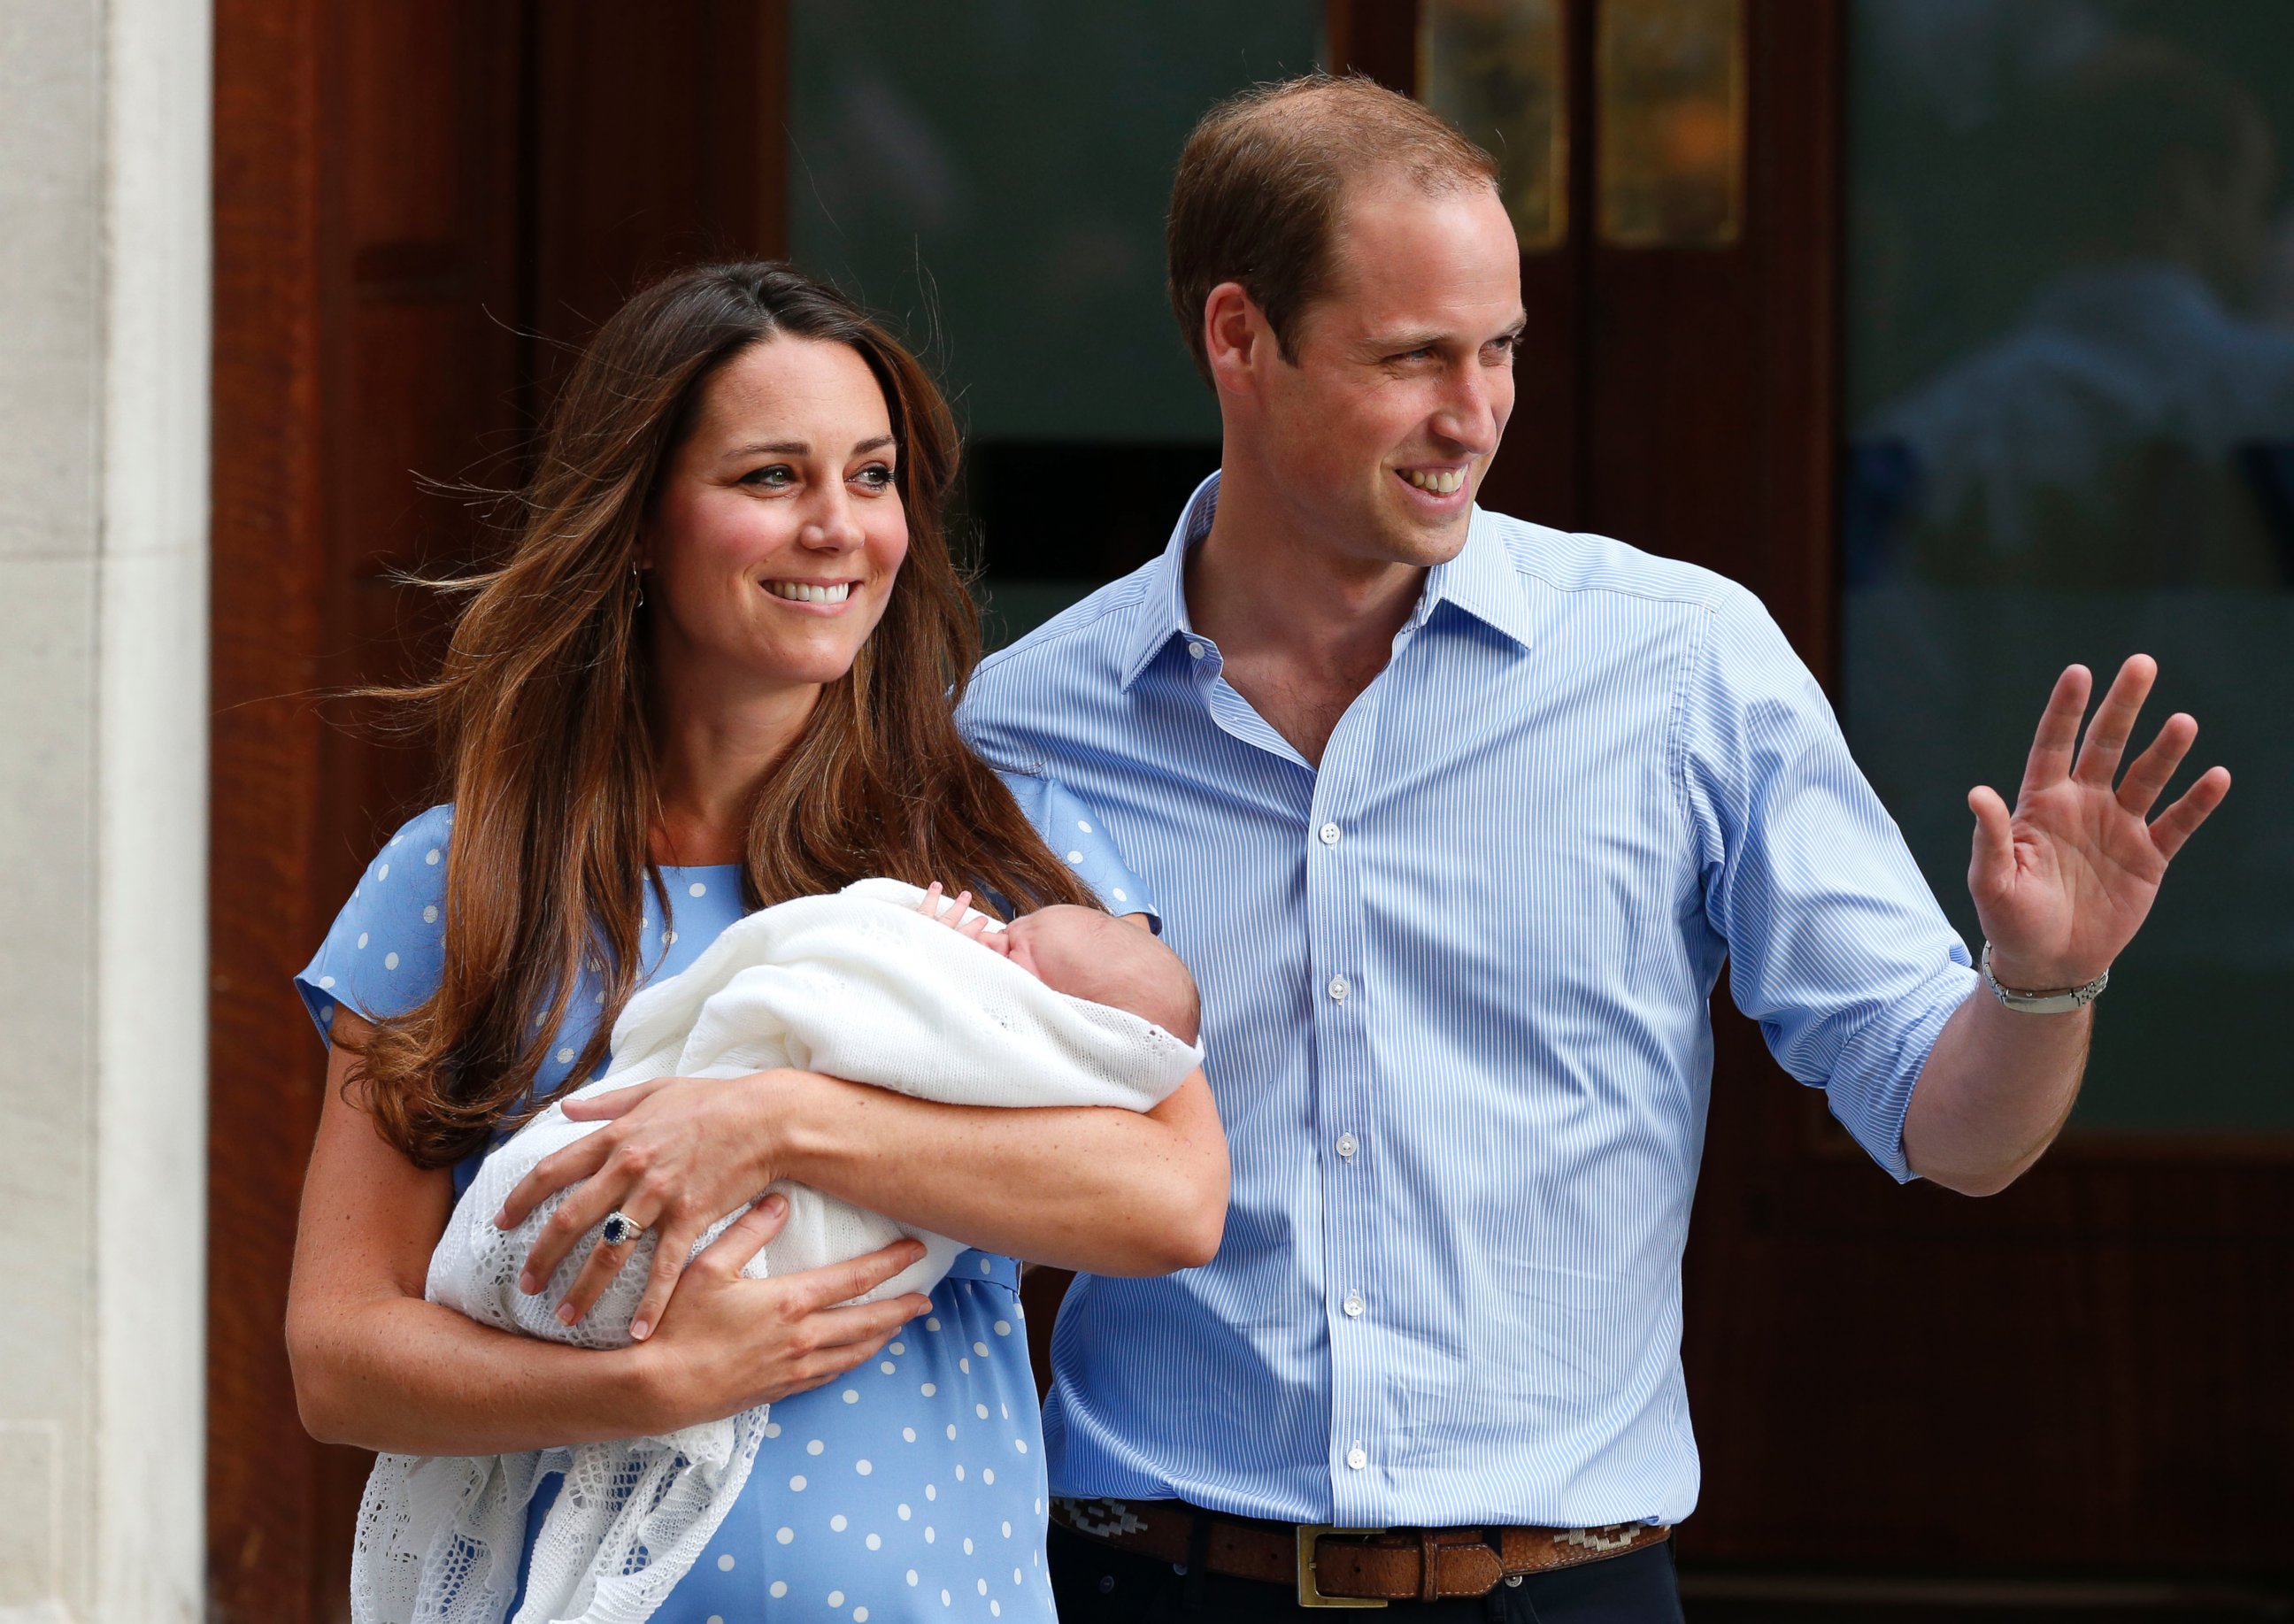 PHOTO: Britain's Prince William and Kate, Duchess of Cambridge hold the Prince of Cambridge, July 23, 2013, as they pose for photographers outside St. Mary's Hospital exclusive Lindo Wing in London where the Duchess gave birth.